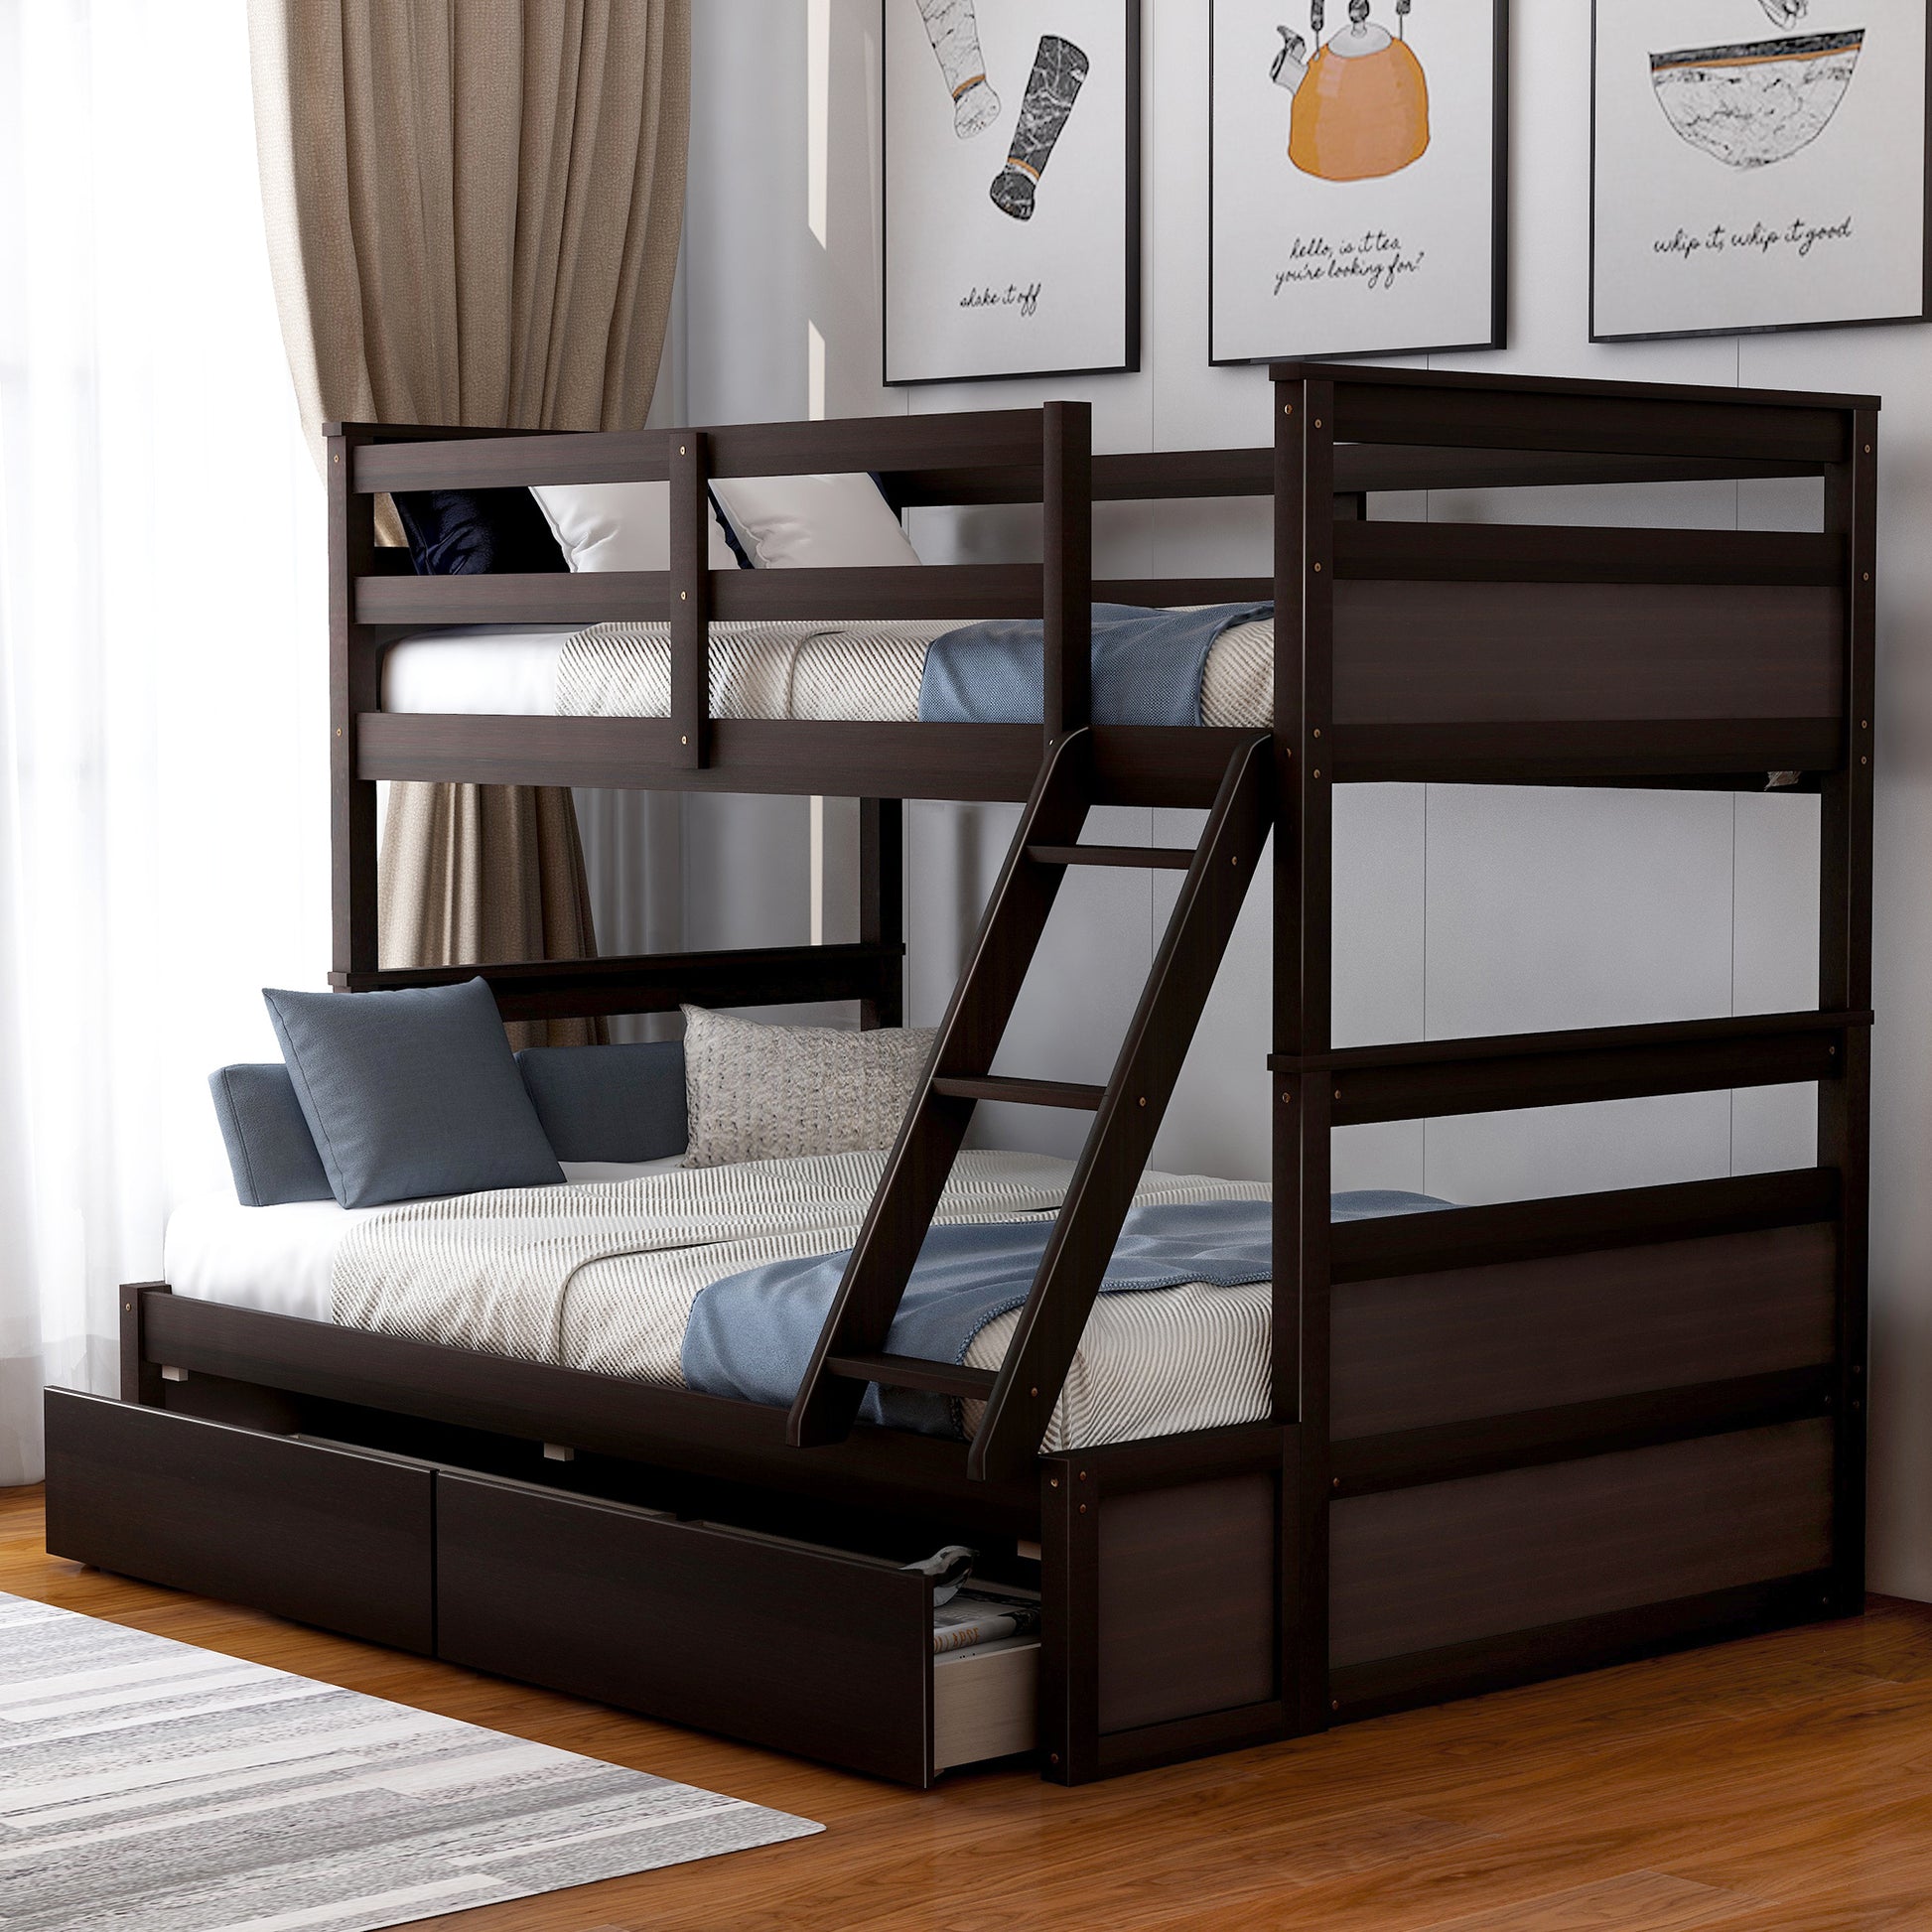 Twin over Full Bunk Bed with Storage - Espresso